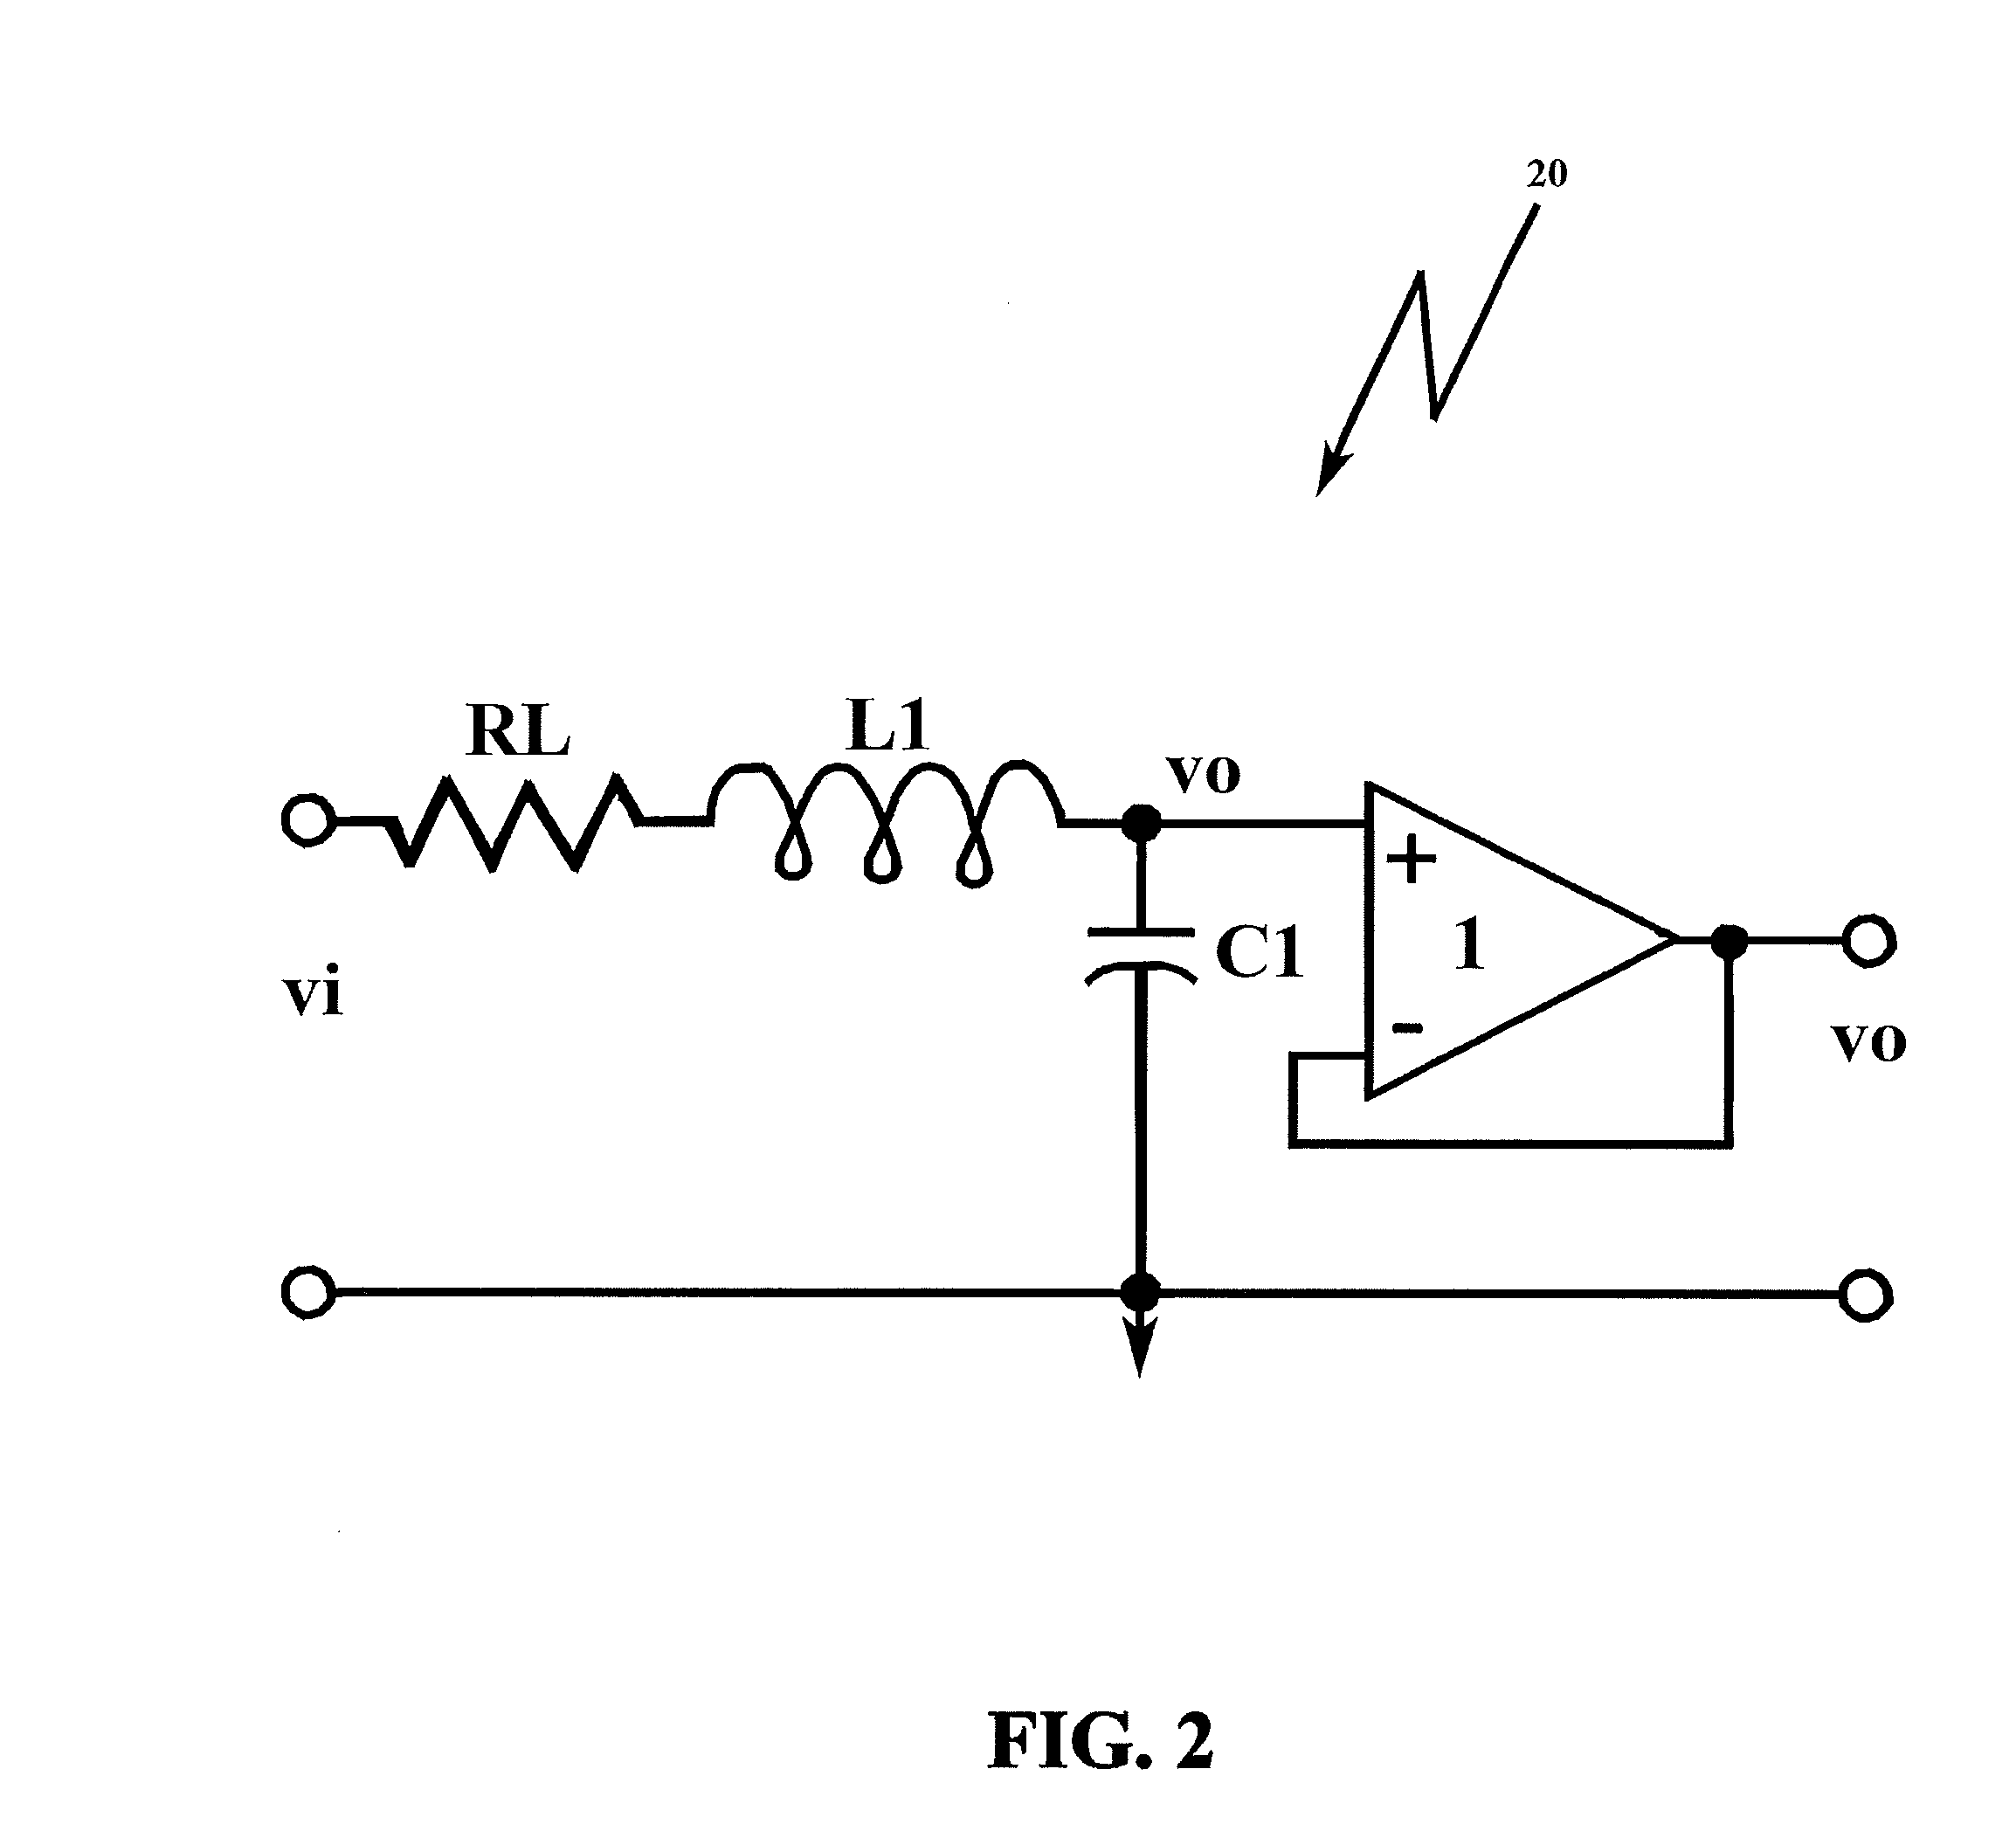 Compensation for canonical second order systems for eliminating peaking at the natural frequency and increasing bandwidth